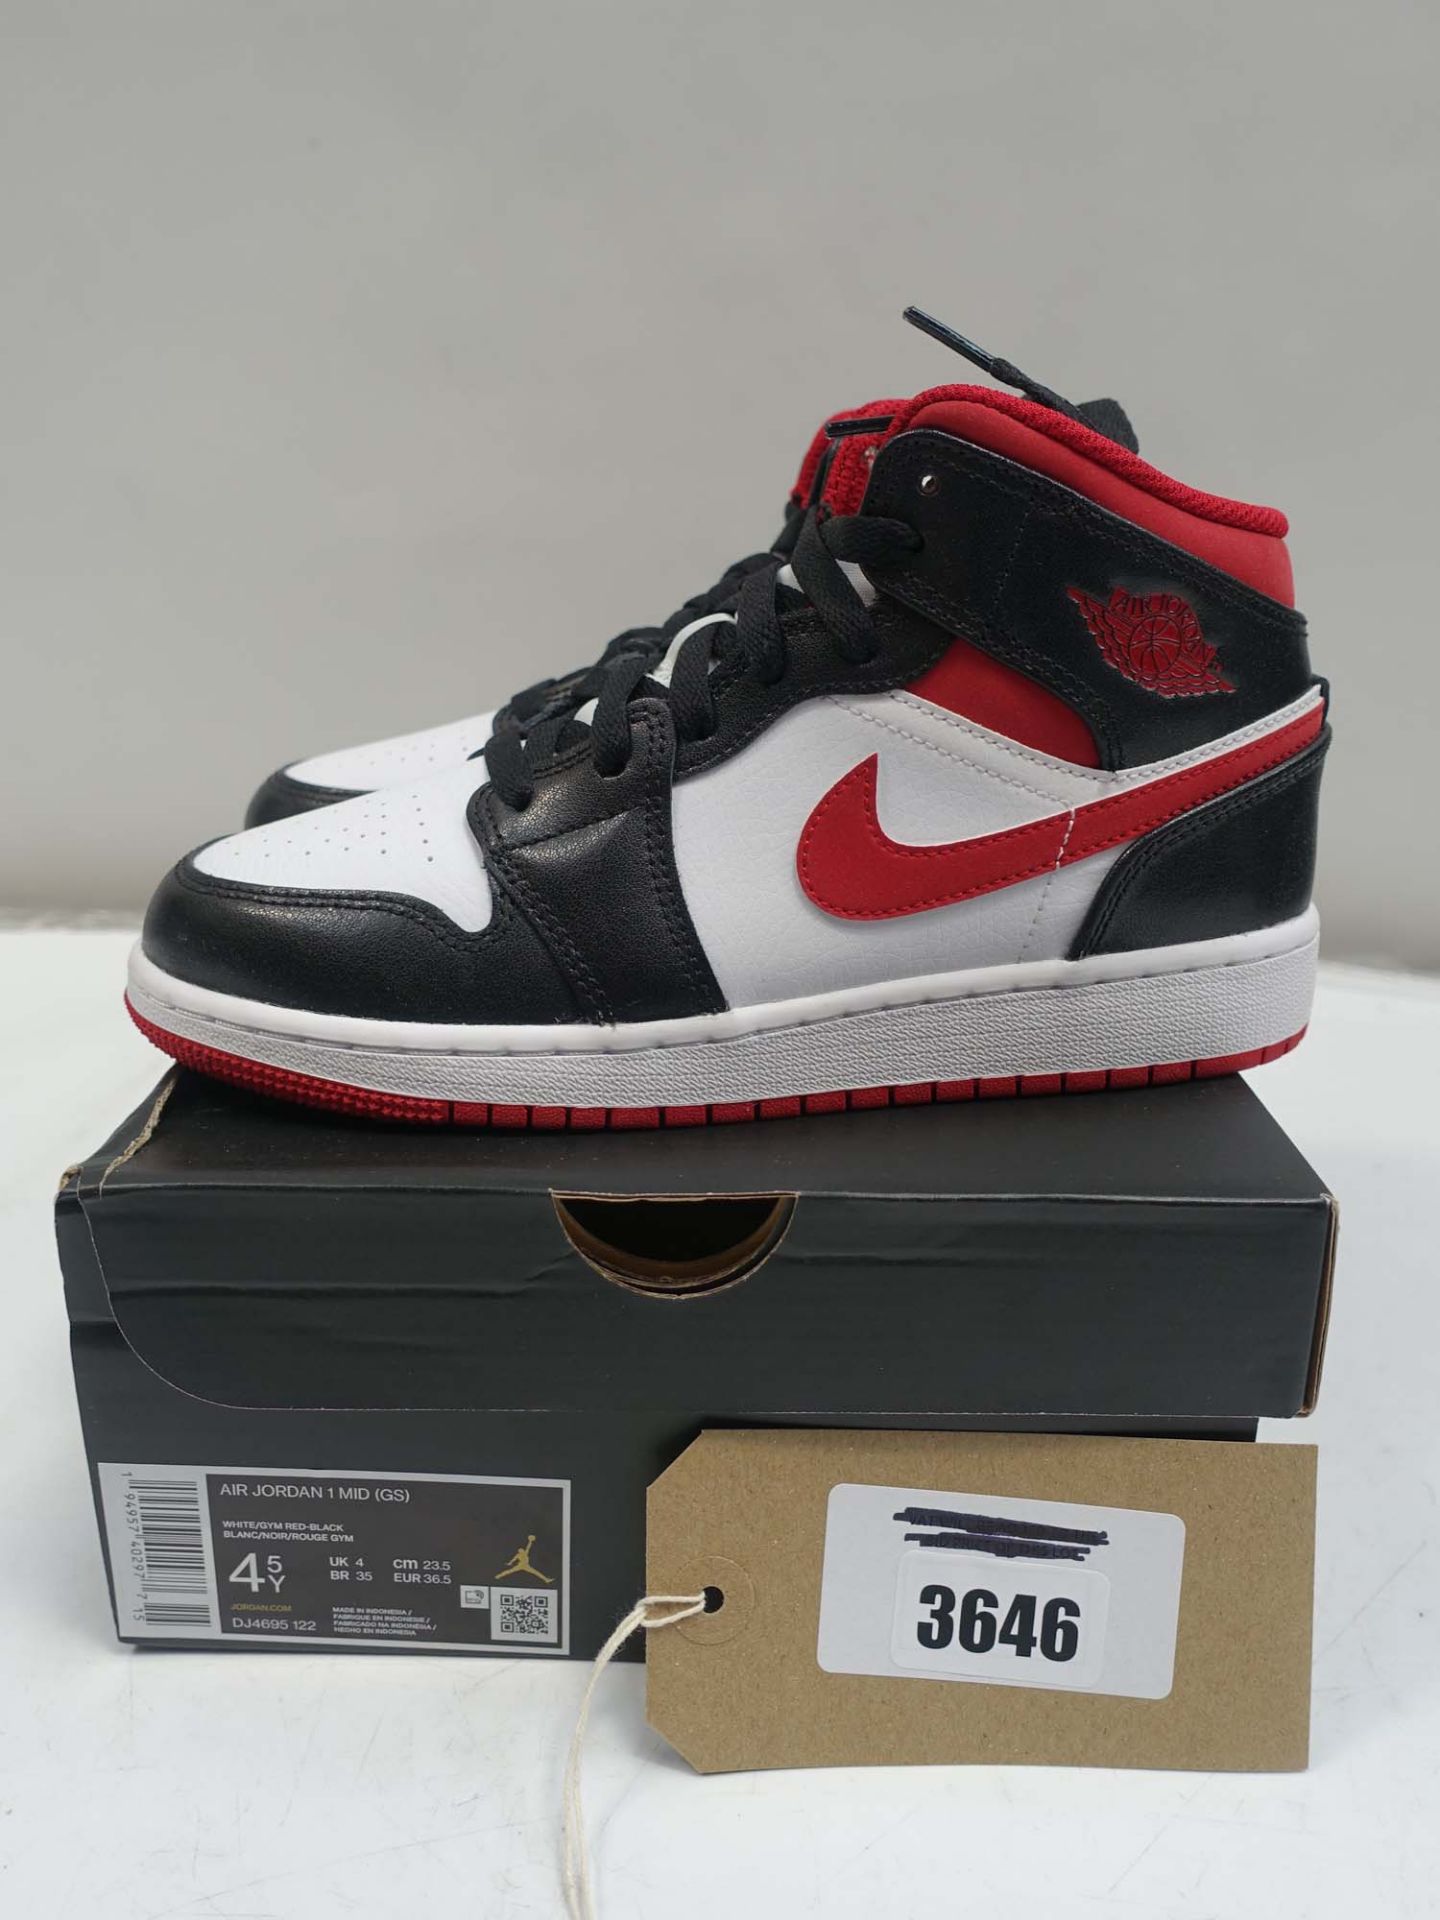 Nike Air Jordan 1 Mid Gym Red Black White childrens trainers size 4